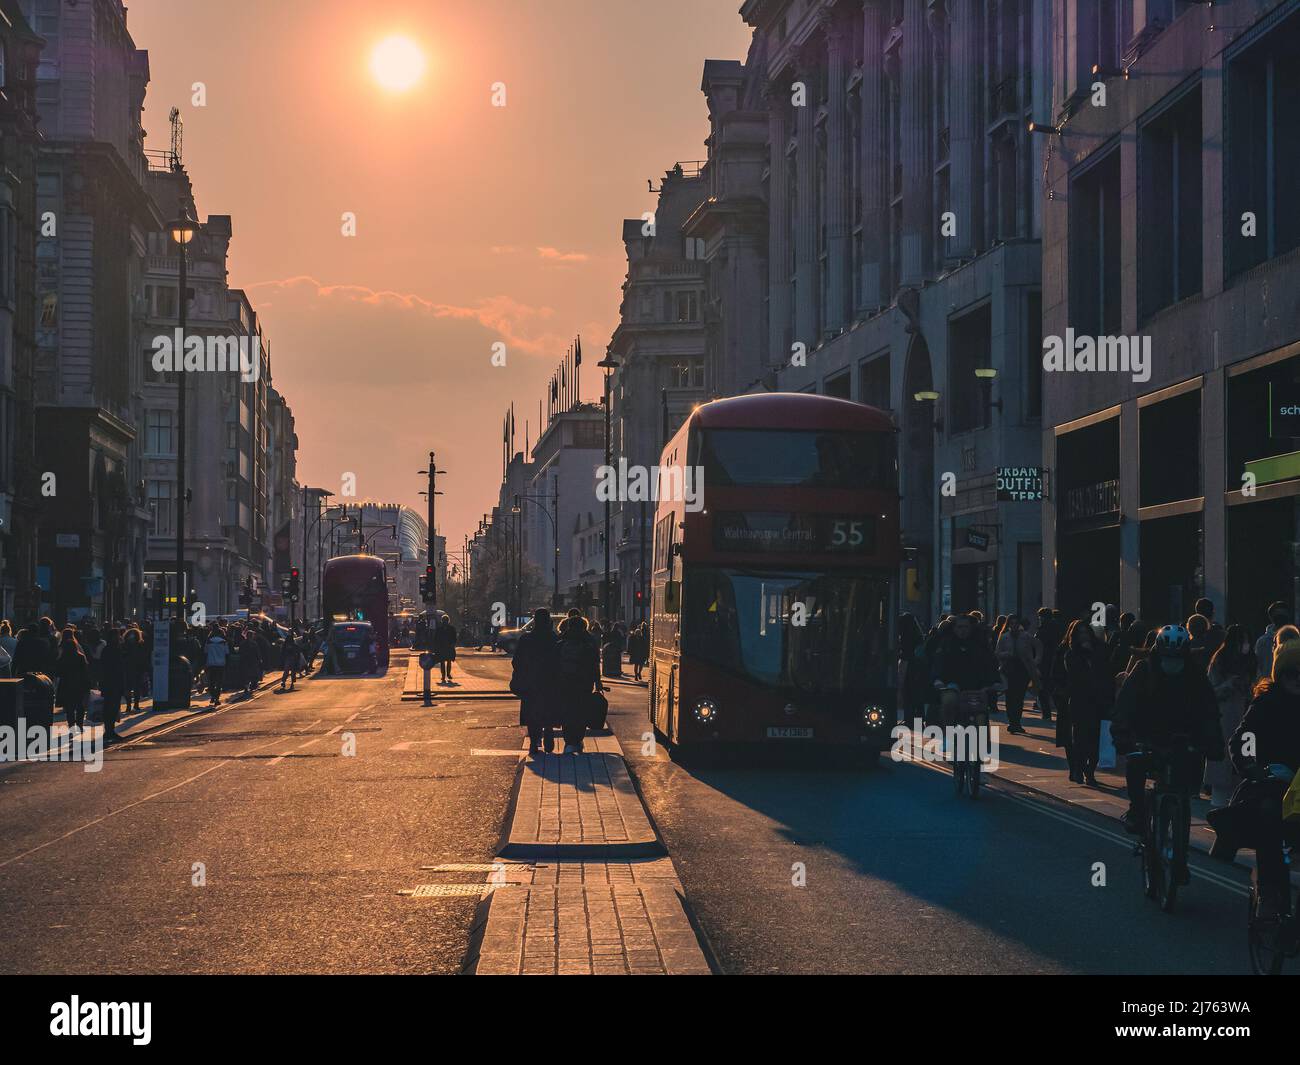 London, England - April 2, 2022: Double-decker bus on the famous Oxford Street in London at the sunset Stock Photo